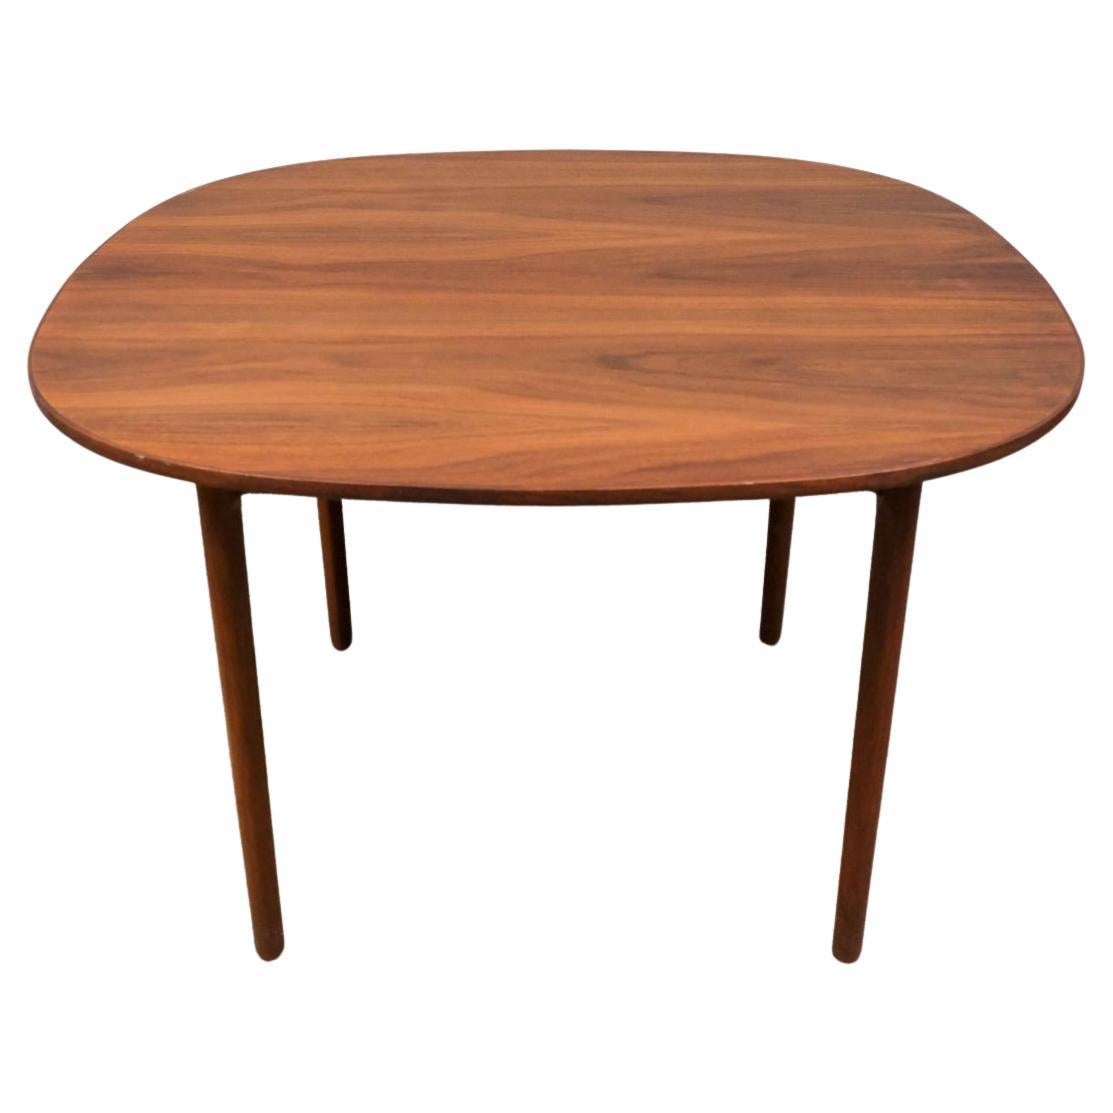 Mid century modern danish teak rounded dining table with two leaves. This table sits on (4)  tapered legs and has brass hardware under the table. This table sits 4 - 8 chairs. Beautiful woodgrain clean all around. Made in Denmark. Located in